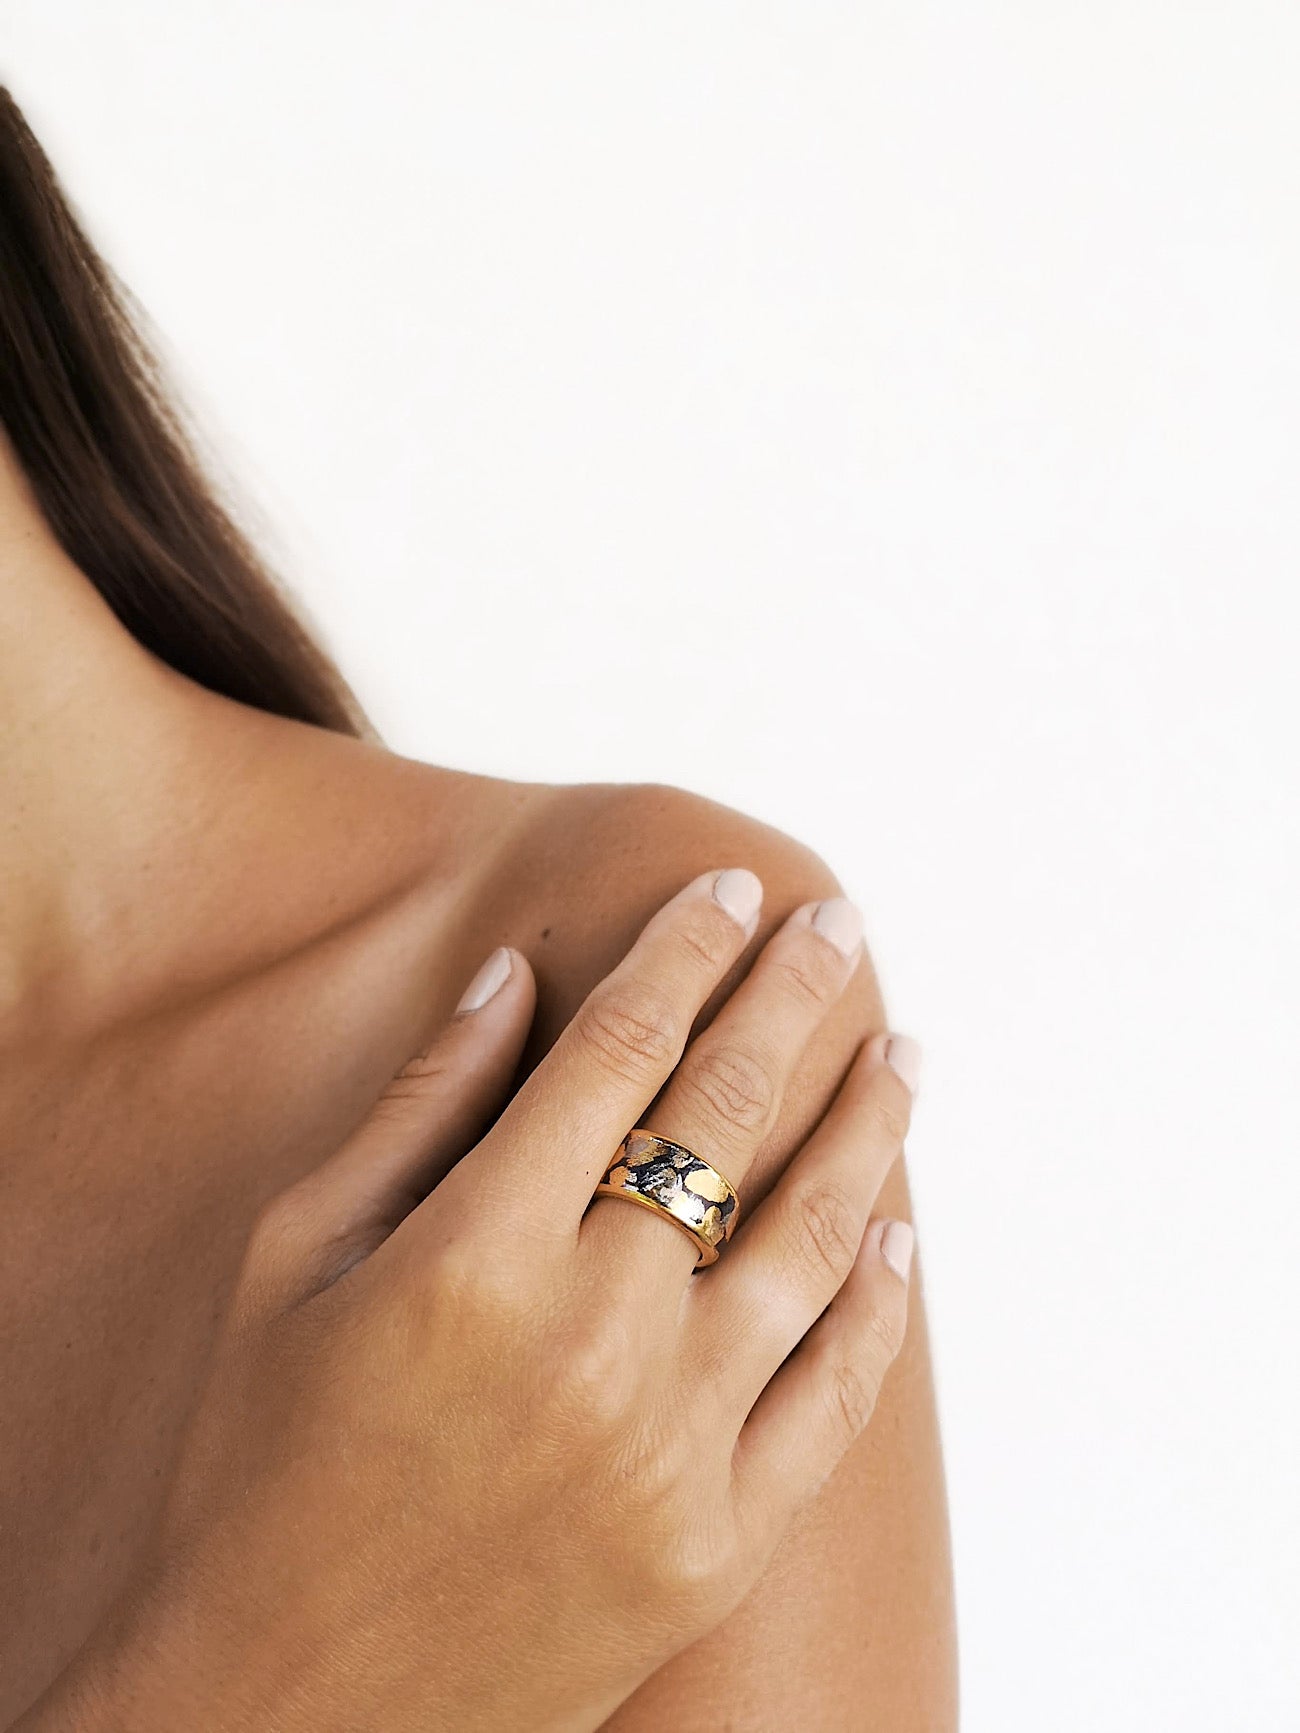 "Leah" Porcelain Ring With Gold And Platinum